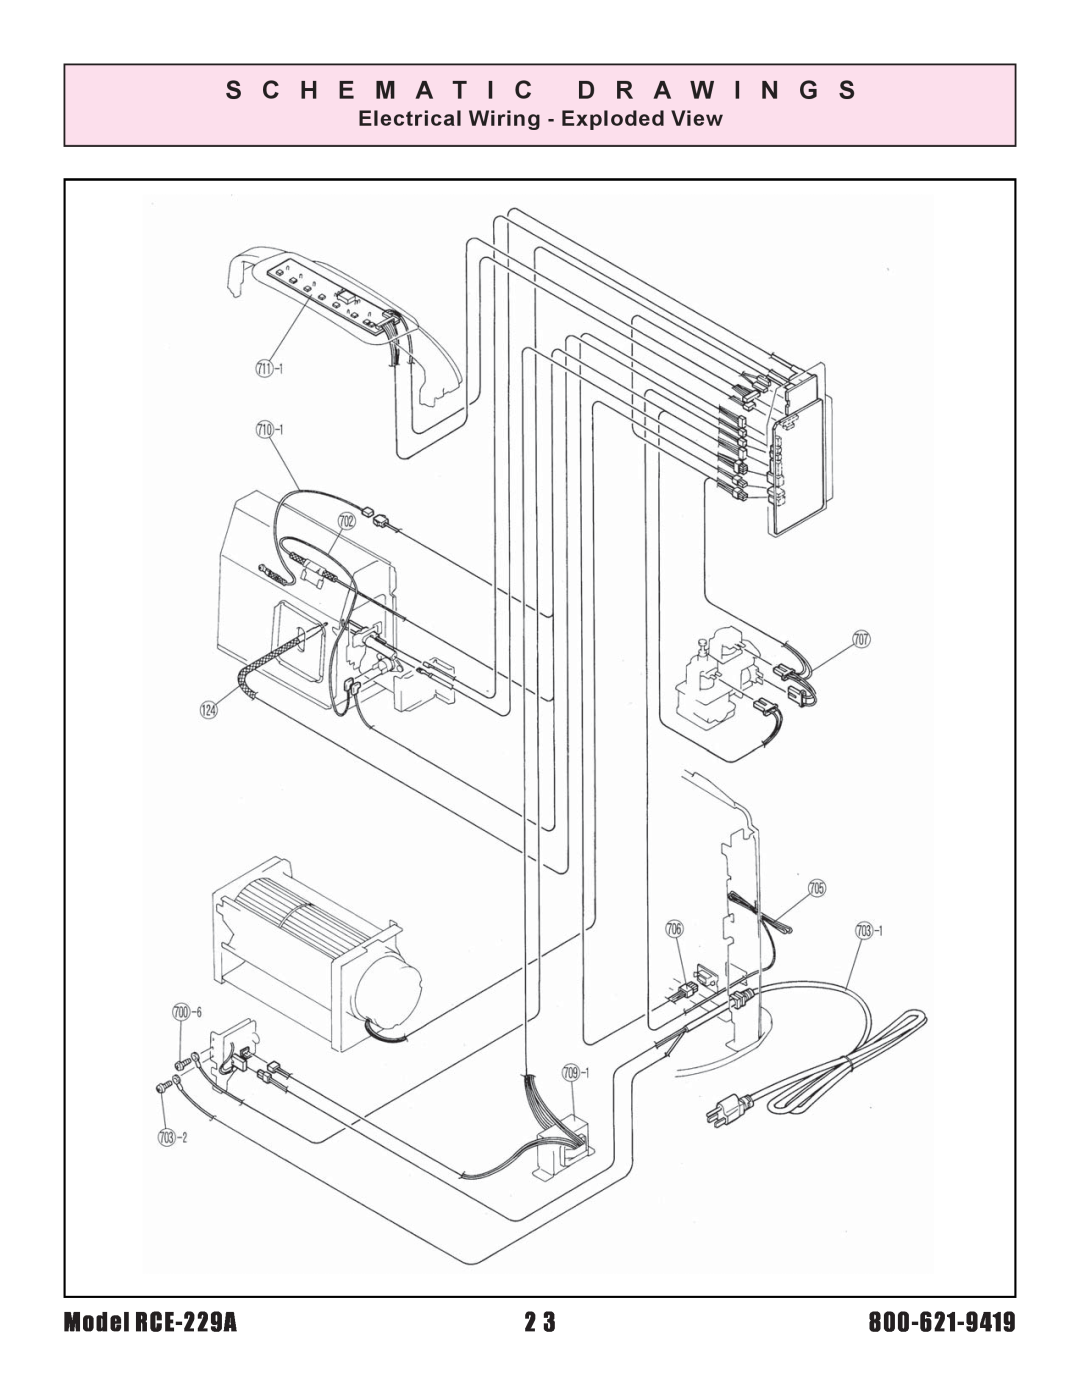 Rinnai installation instructions S C H E M A T I C D R A W I N G S, Model RCE-229A, Electrical Wiring - Exploded View 